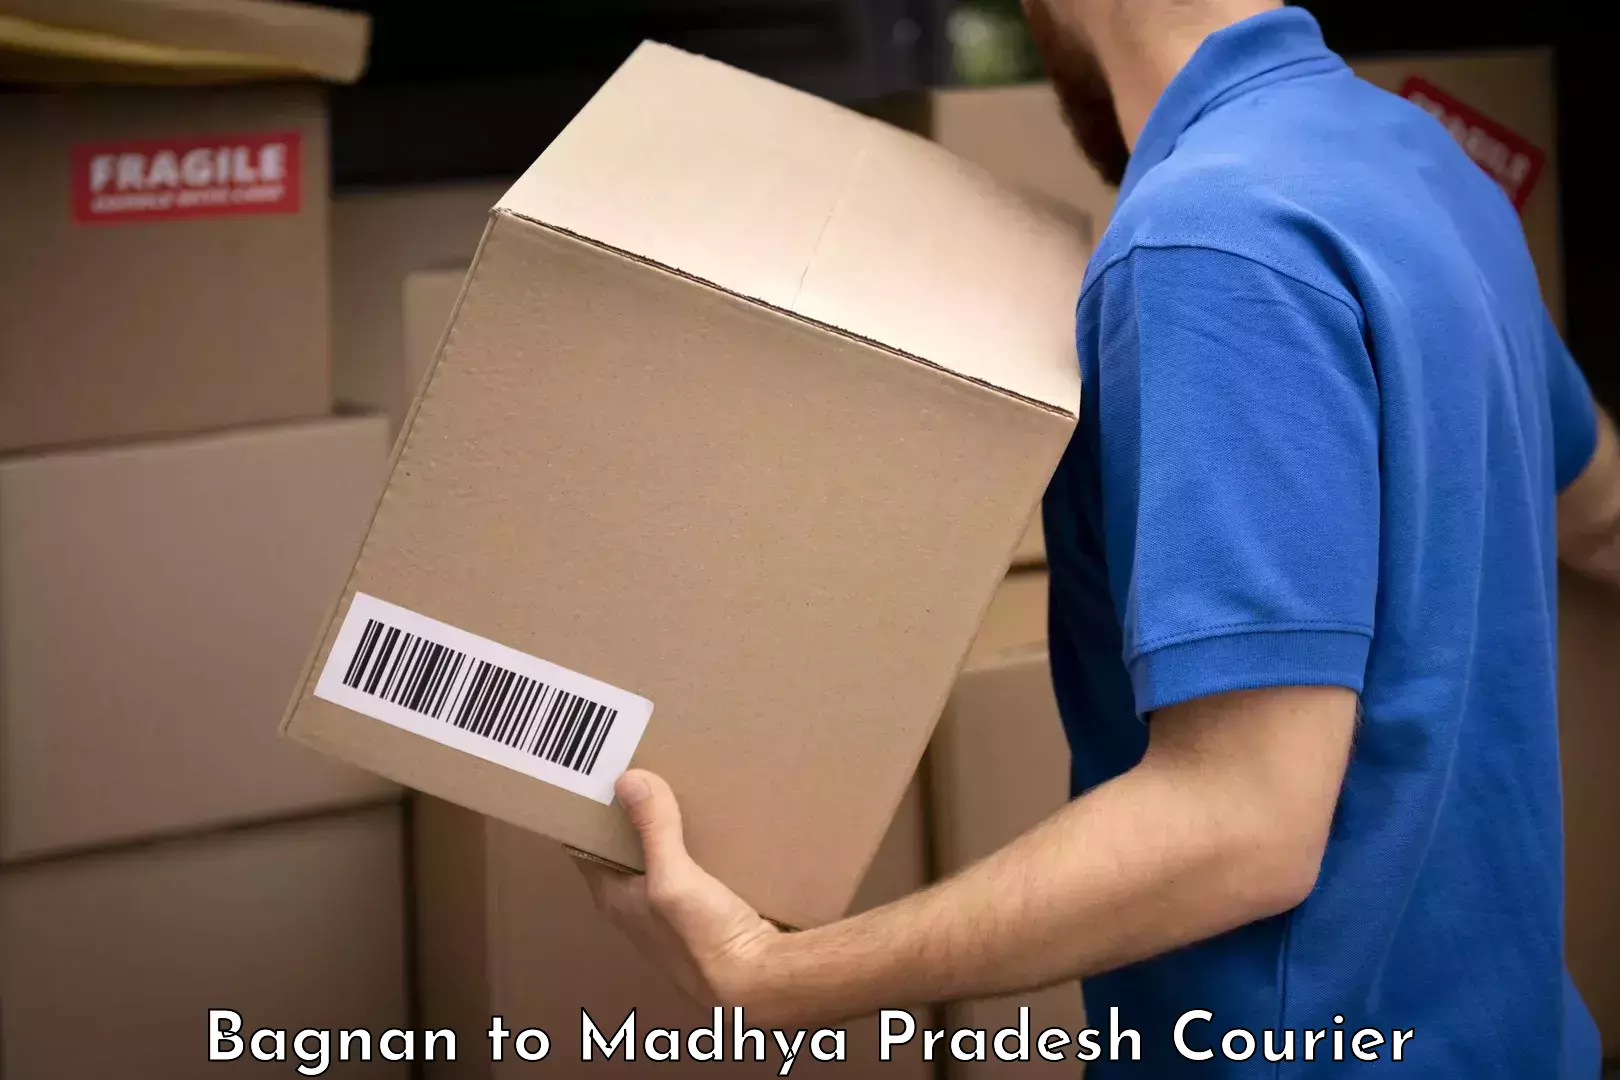 Baggage delivery technology Bagnan to Madwas